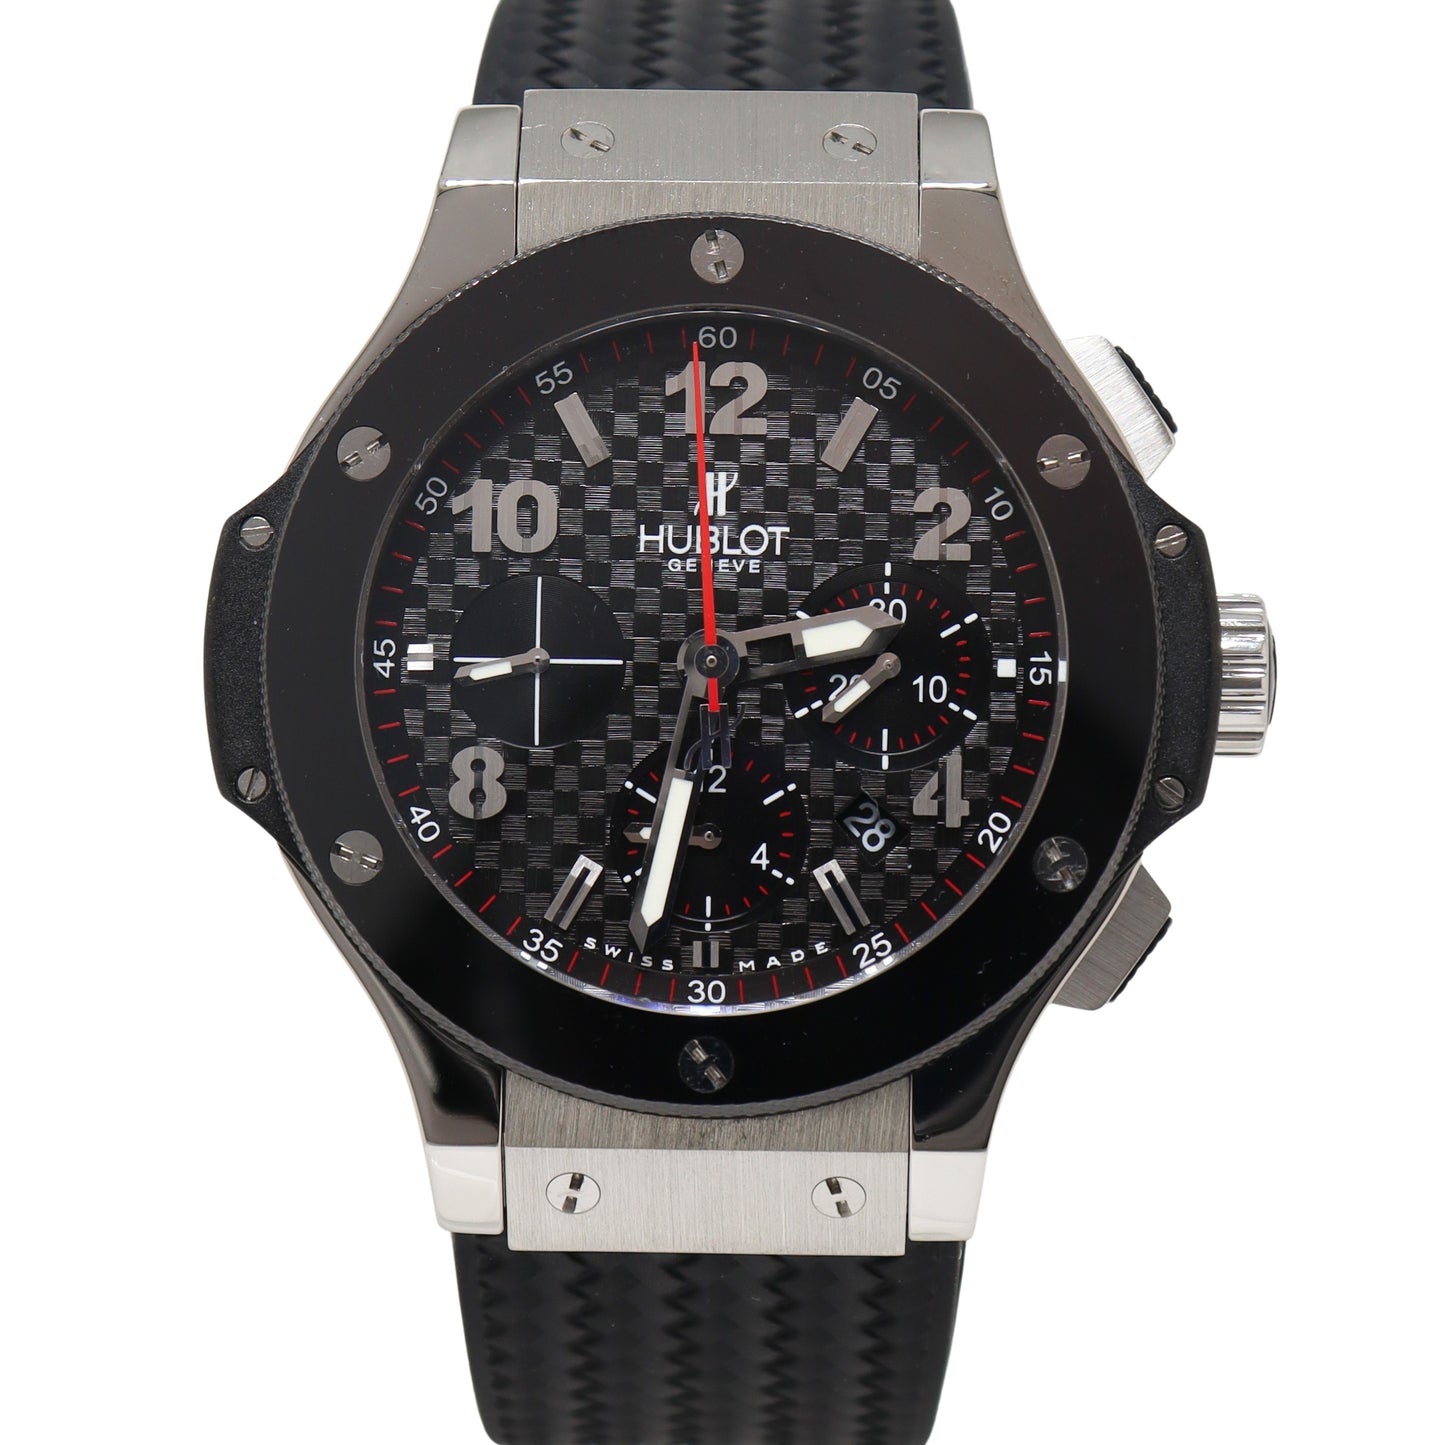 Hublot Big Bang 41mm Stainless Steel Black Carbon Fiber Dial Watch Reference# 341.SB.131.RX - Happy Jewelers Fine Jewelry Lifetime Warranty